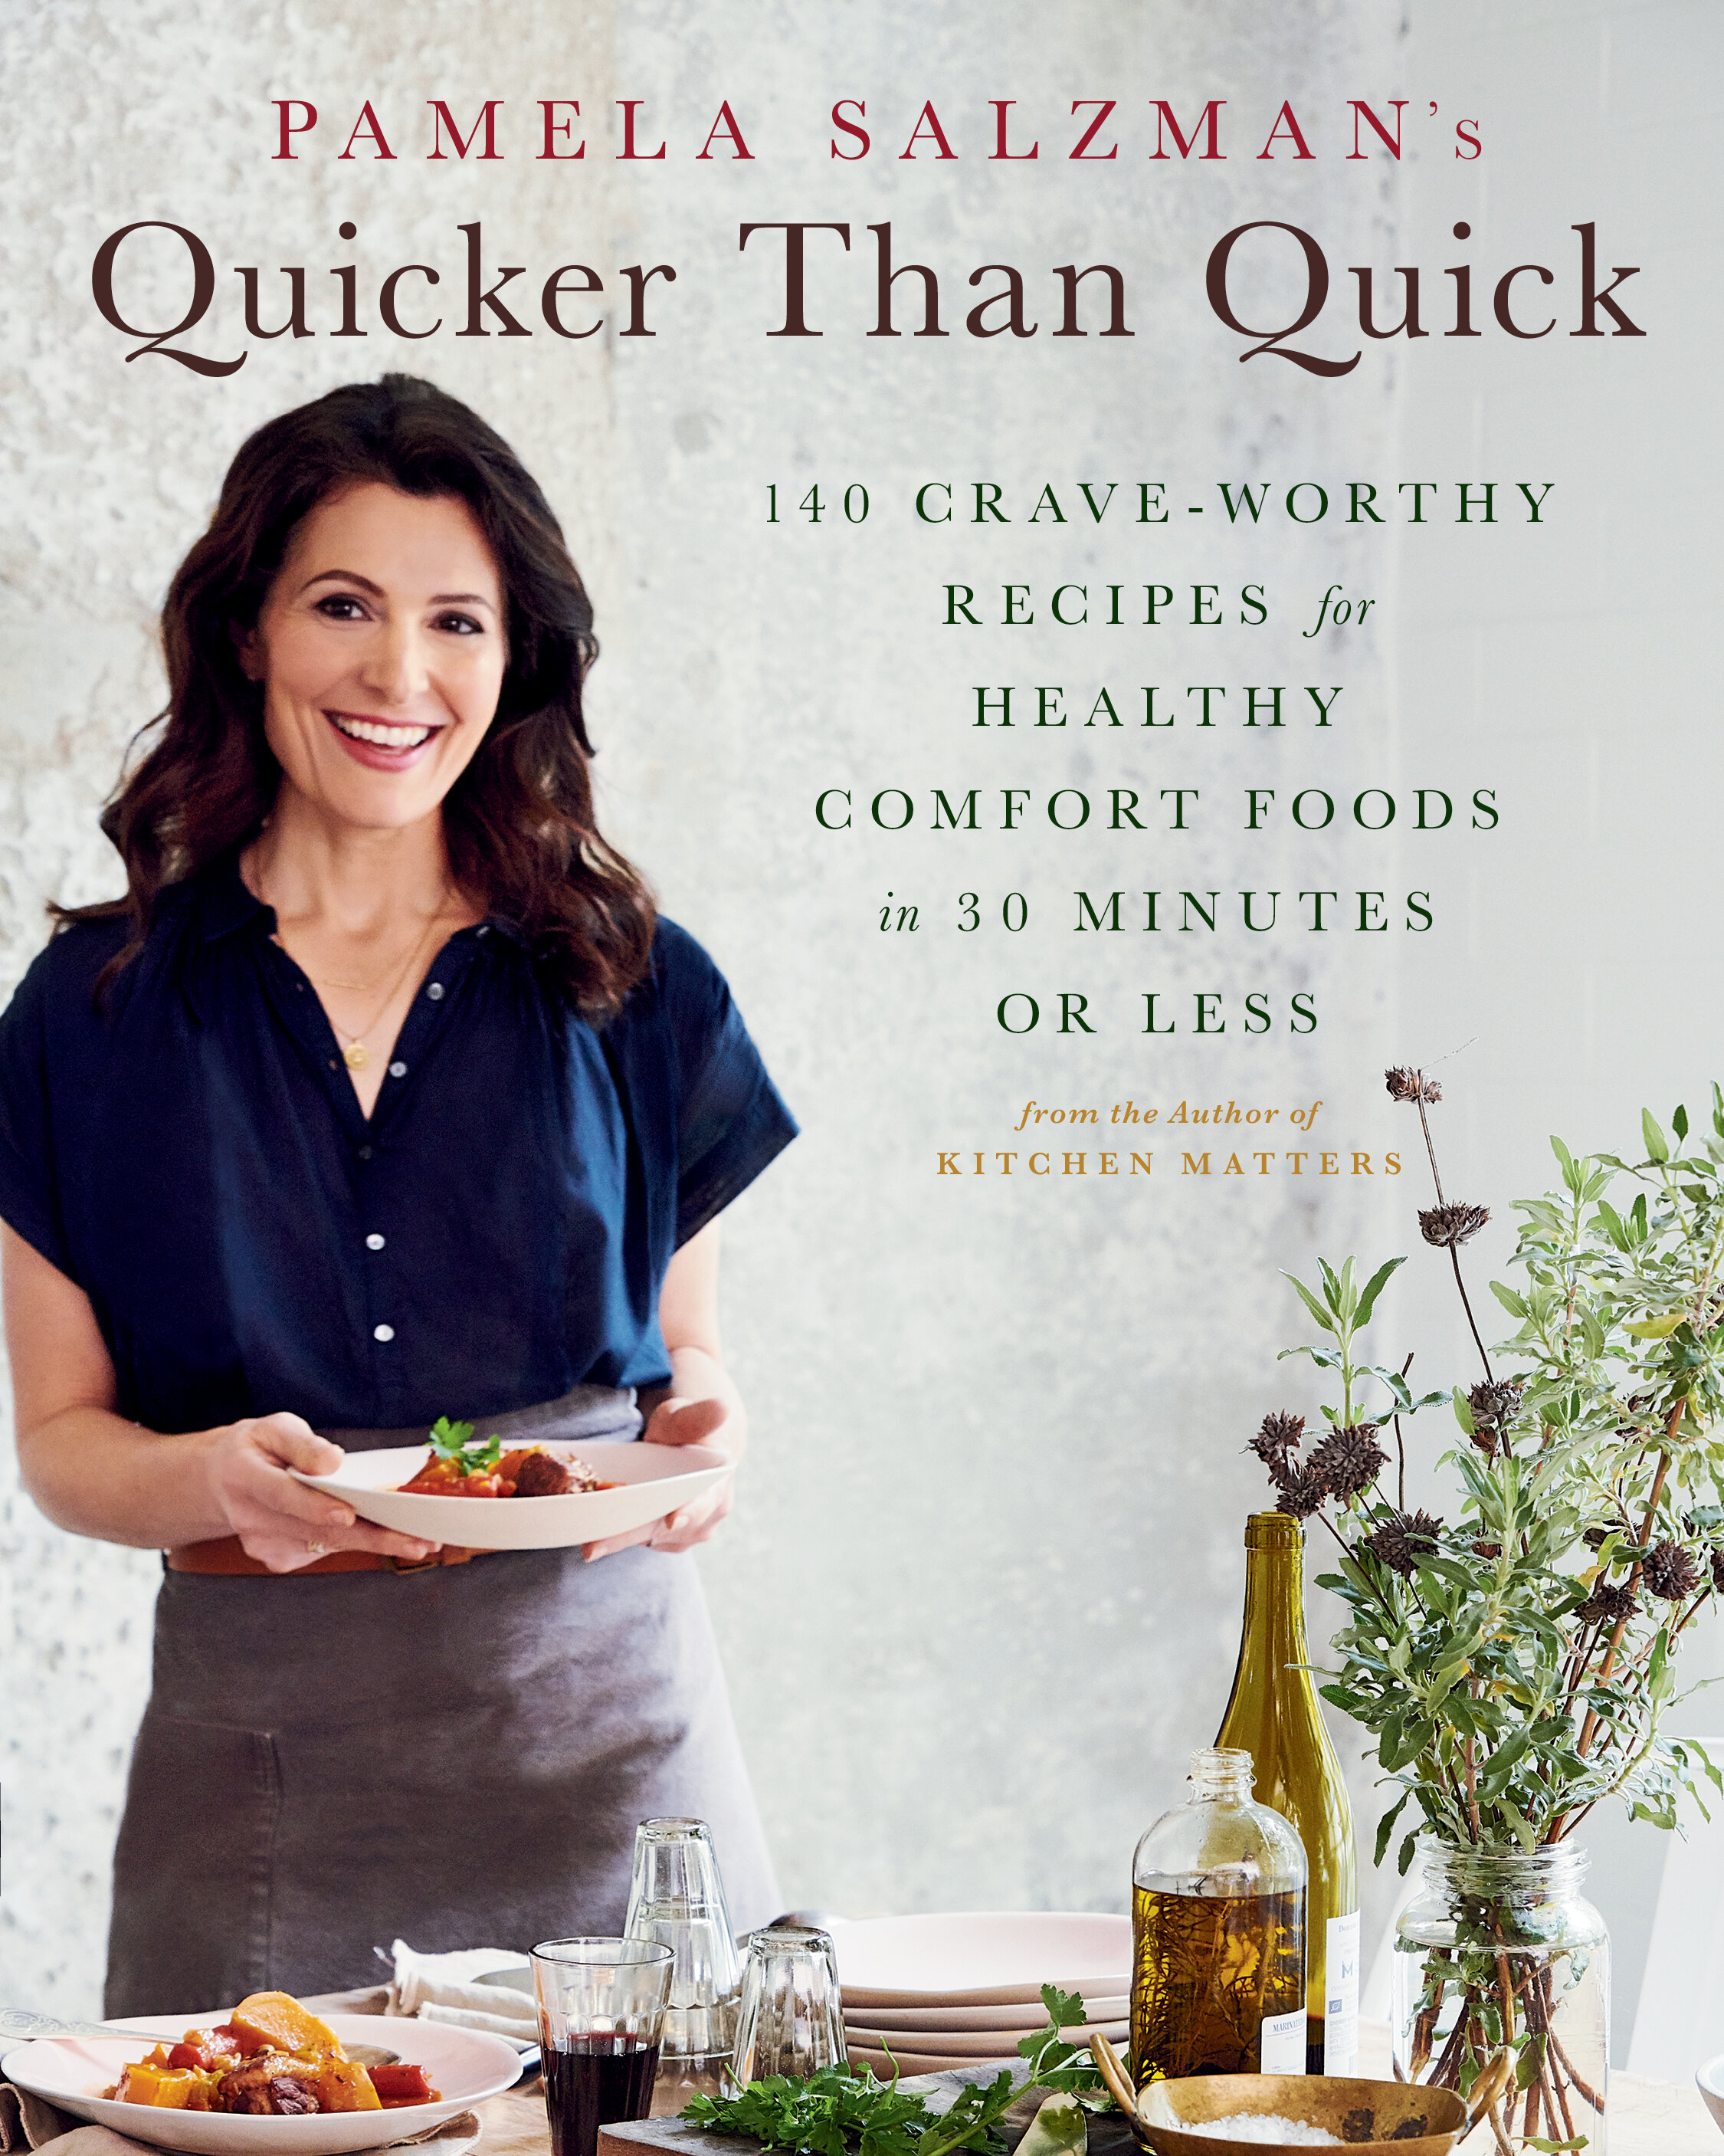 Quicker Than Quick cookbook by Pamela Salzman | featured at Didn't I Just Feed You